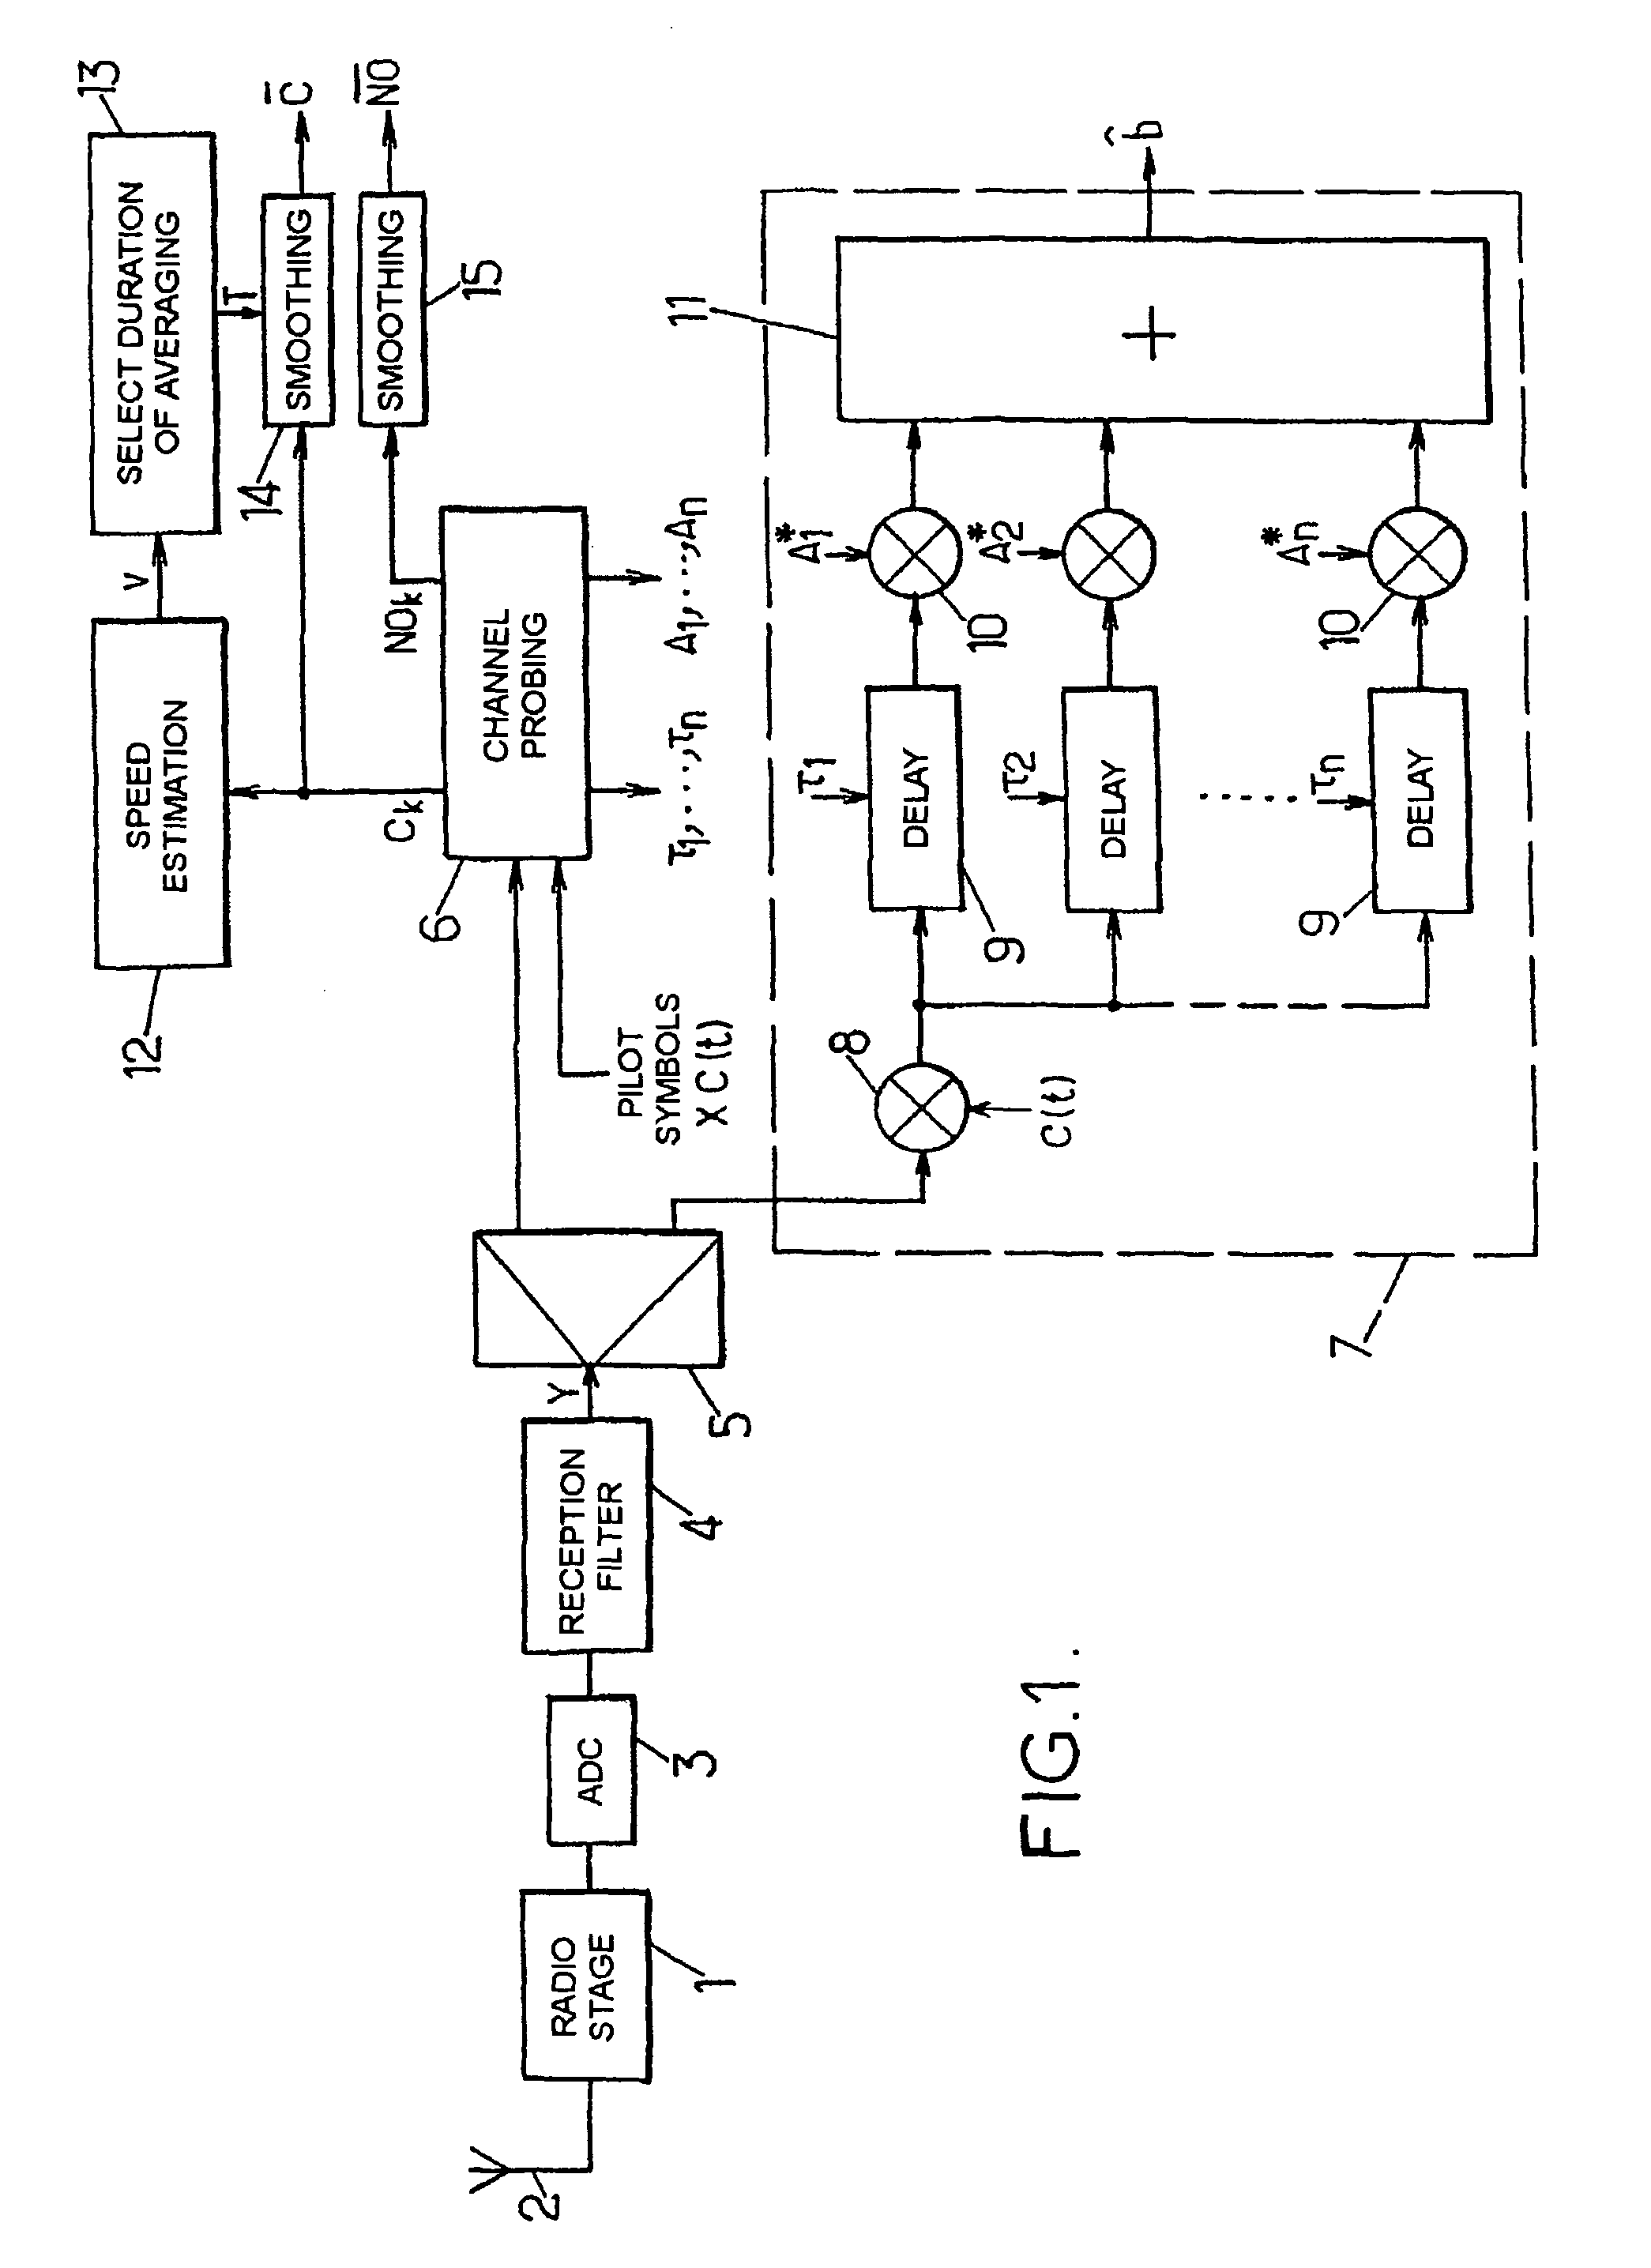 Method and device for evaluating the energy level of a radio signal